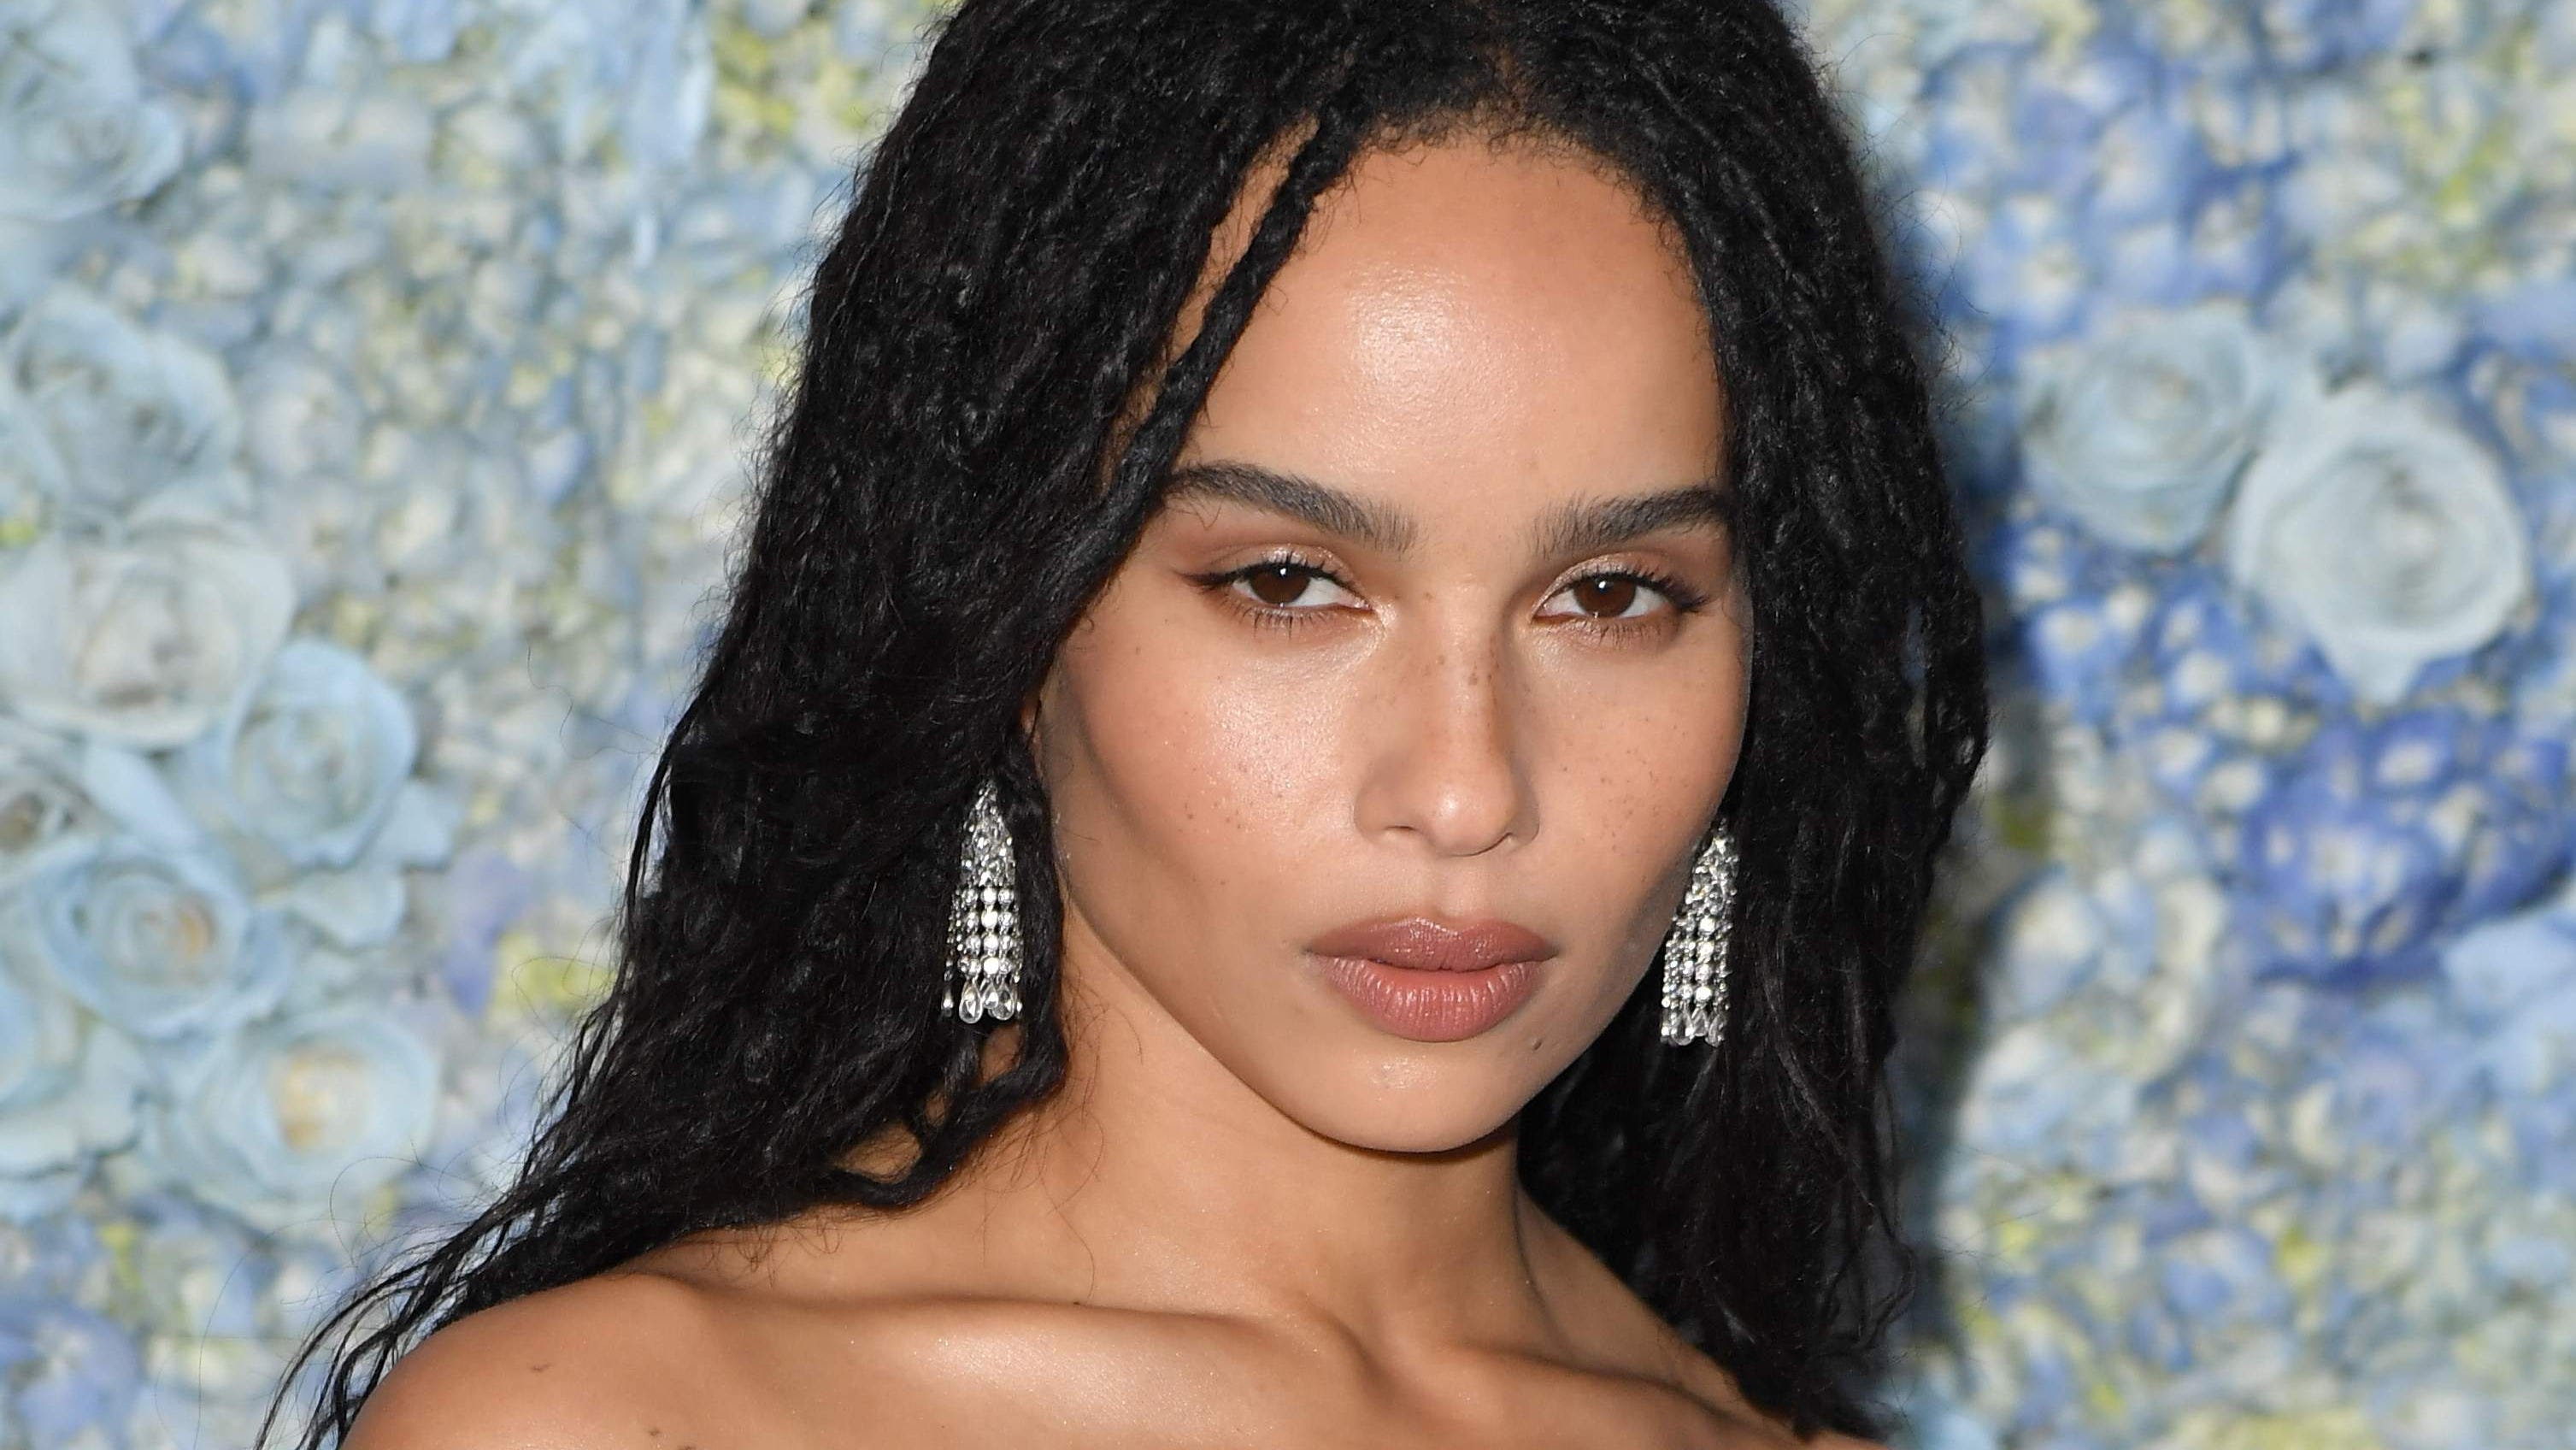 Zoe Kravitz Wedding Day Photos Give Up Close Look At Her